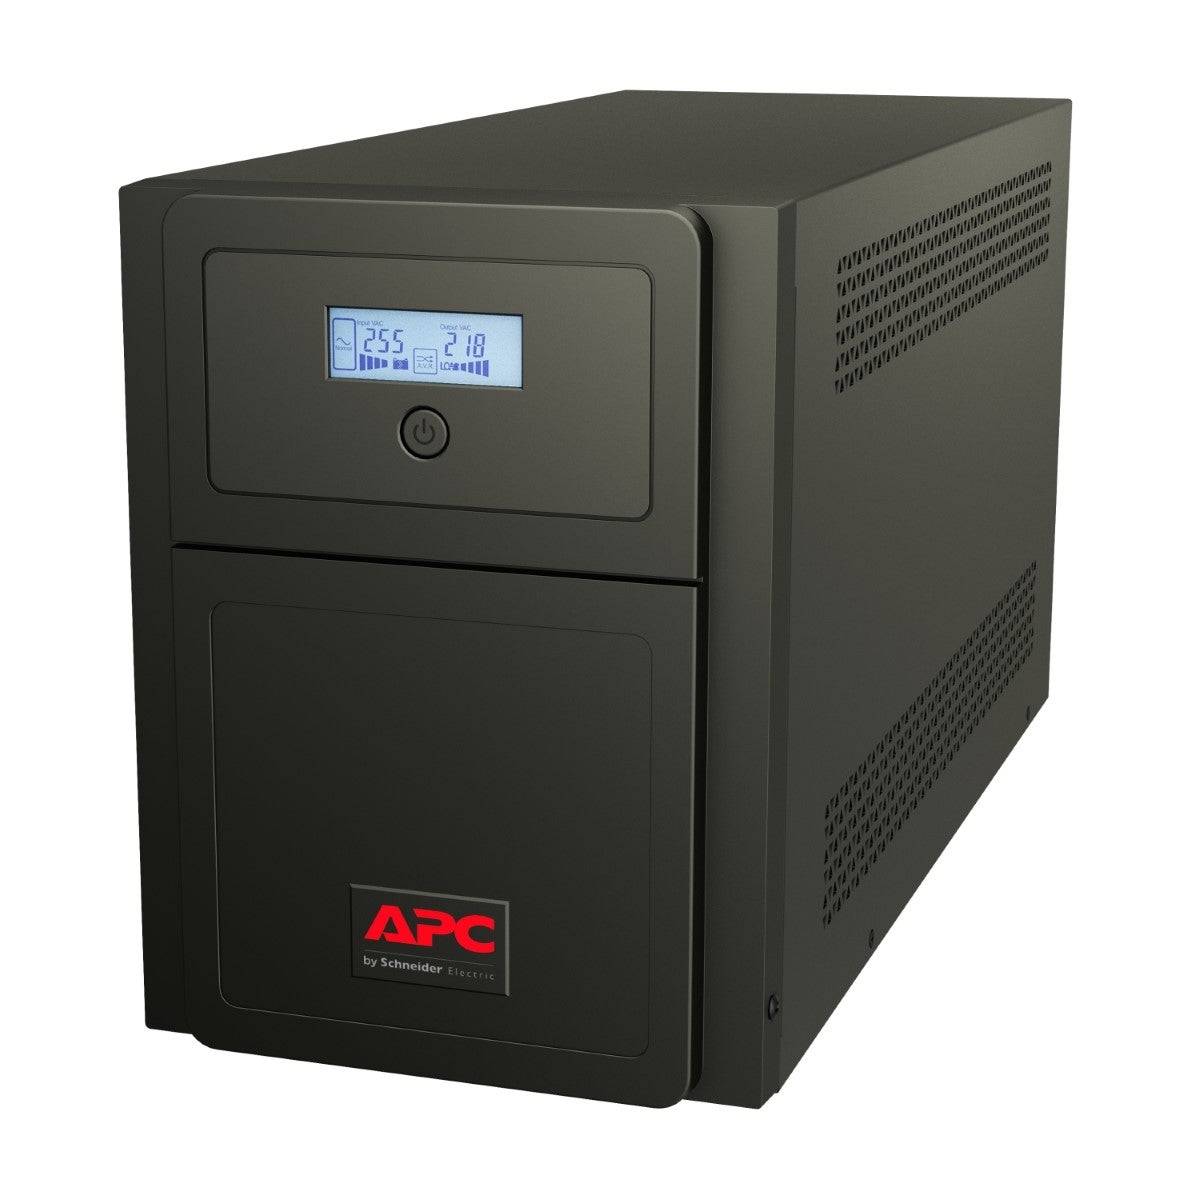 APC Easy UPS 1 Ph Line Interactive, 3kVA, Tower, 230V, 6 Universal outlets, AVR, LCD